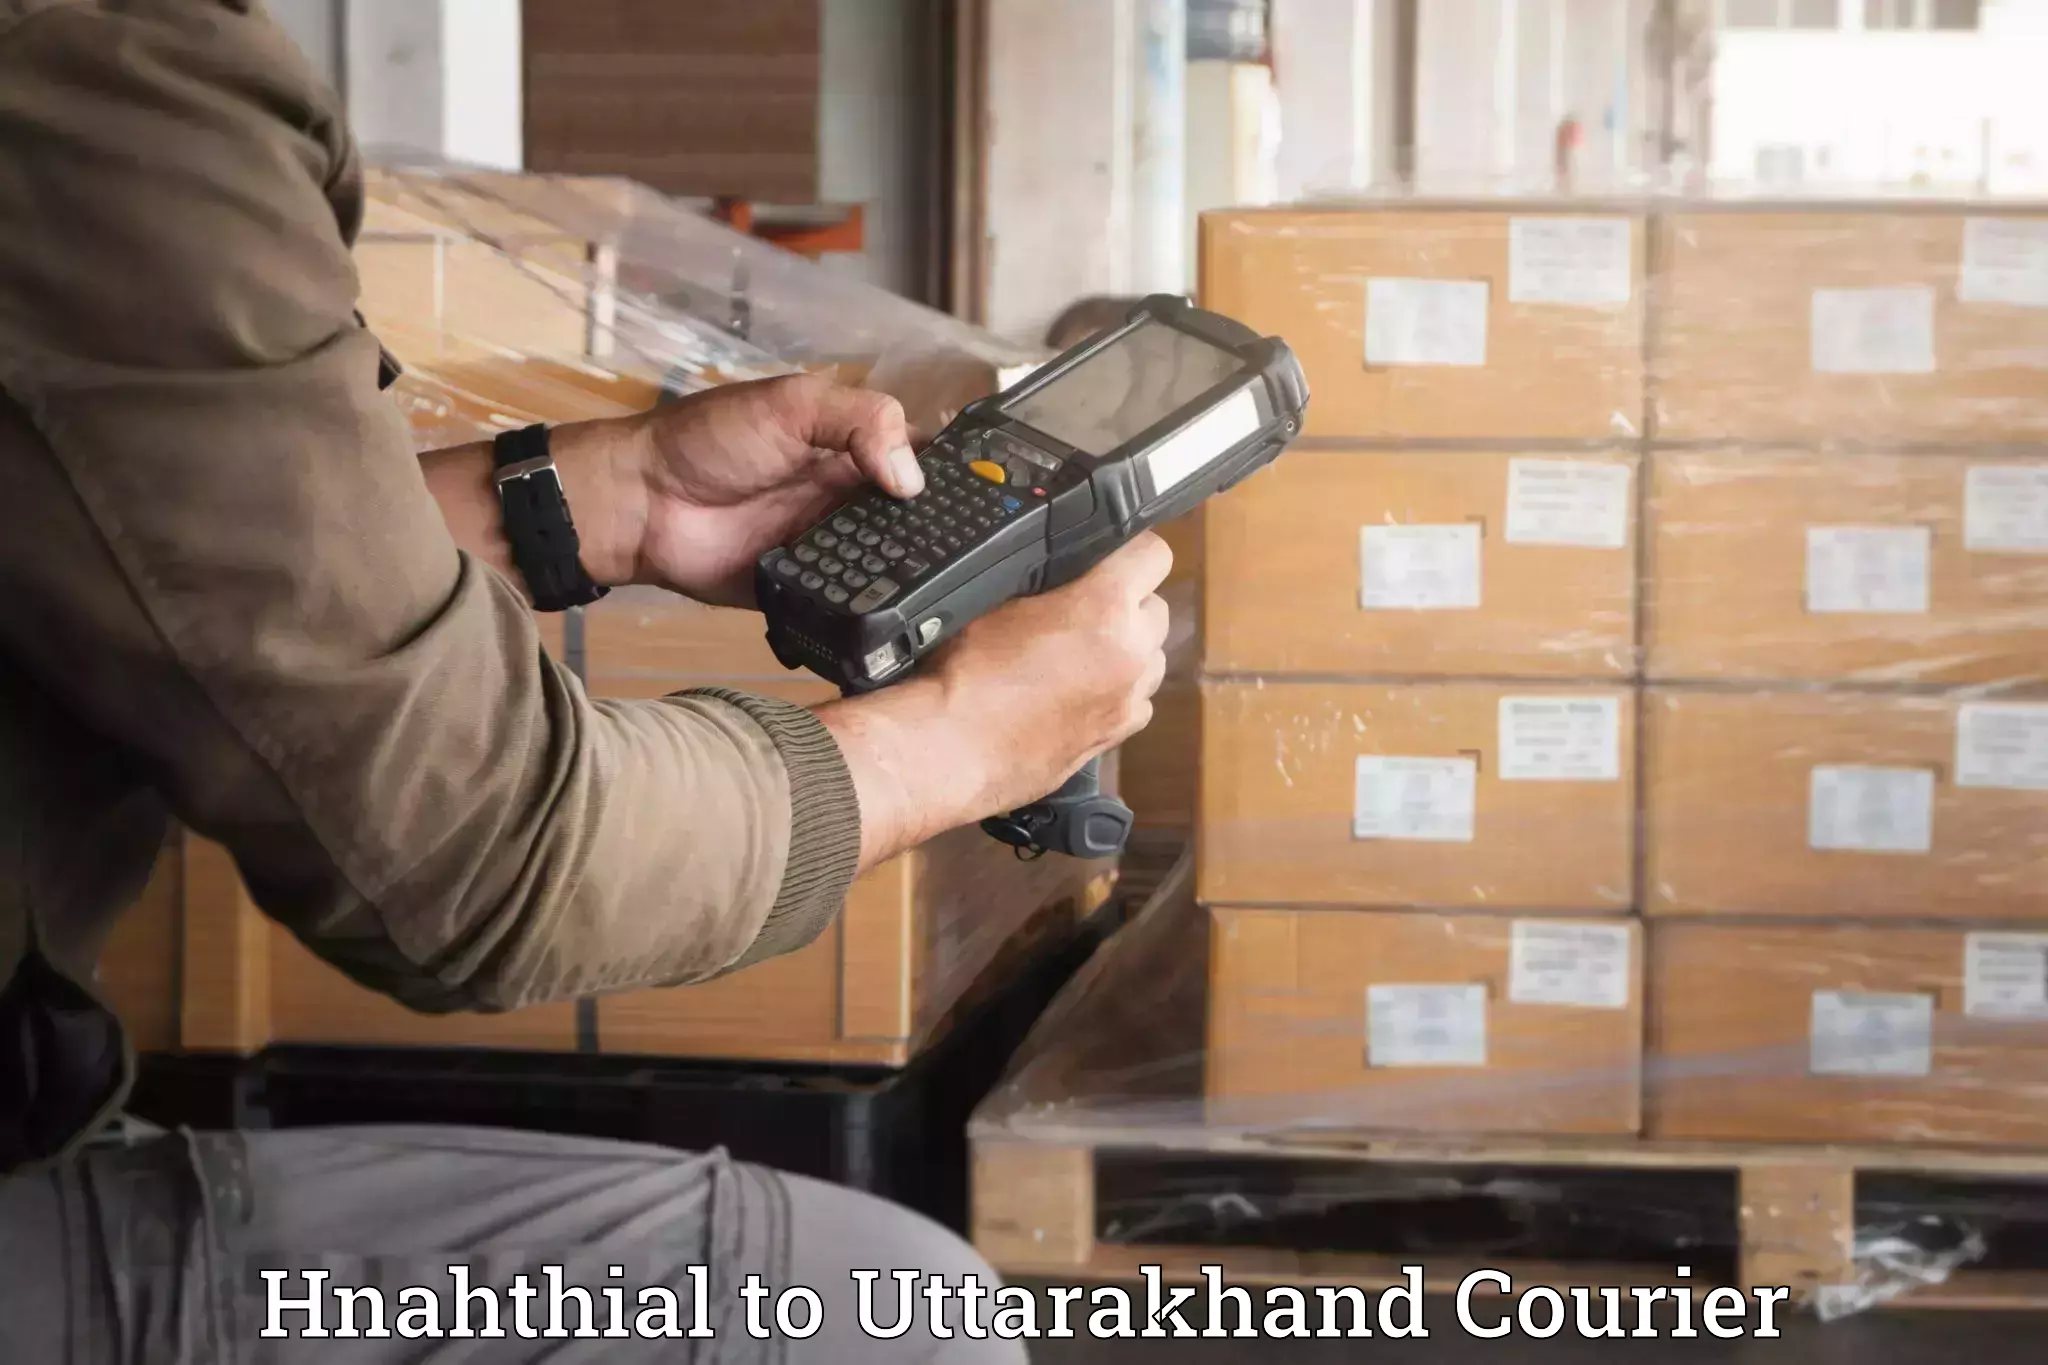 Furniture moving experts Hnahthial to Uttarakhand